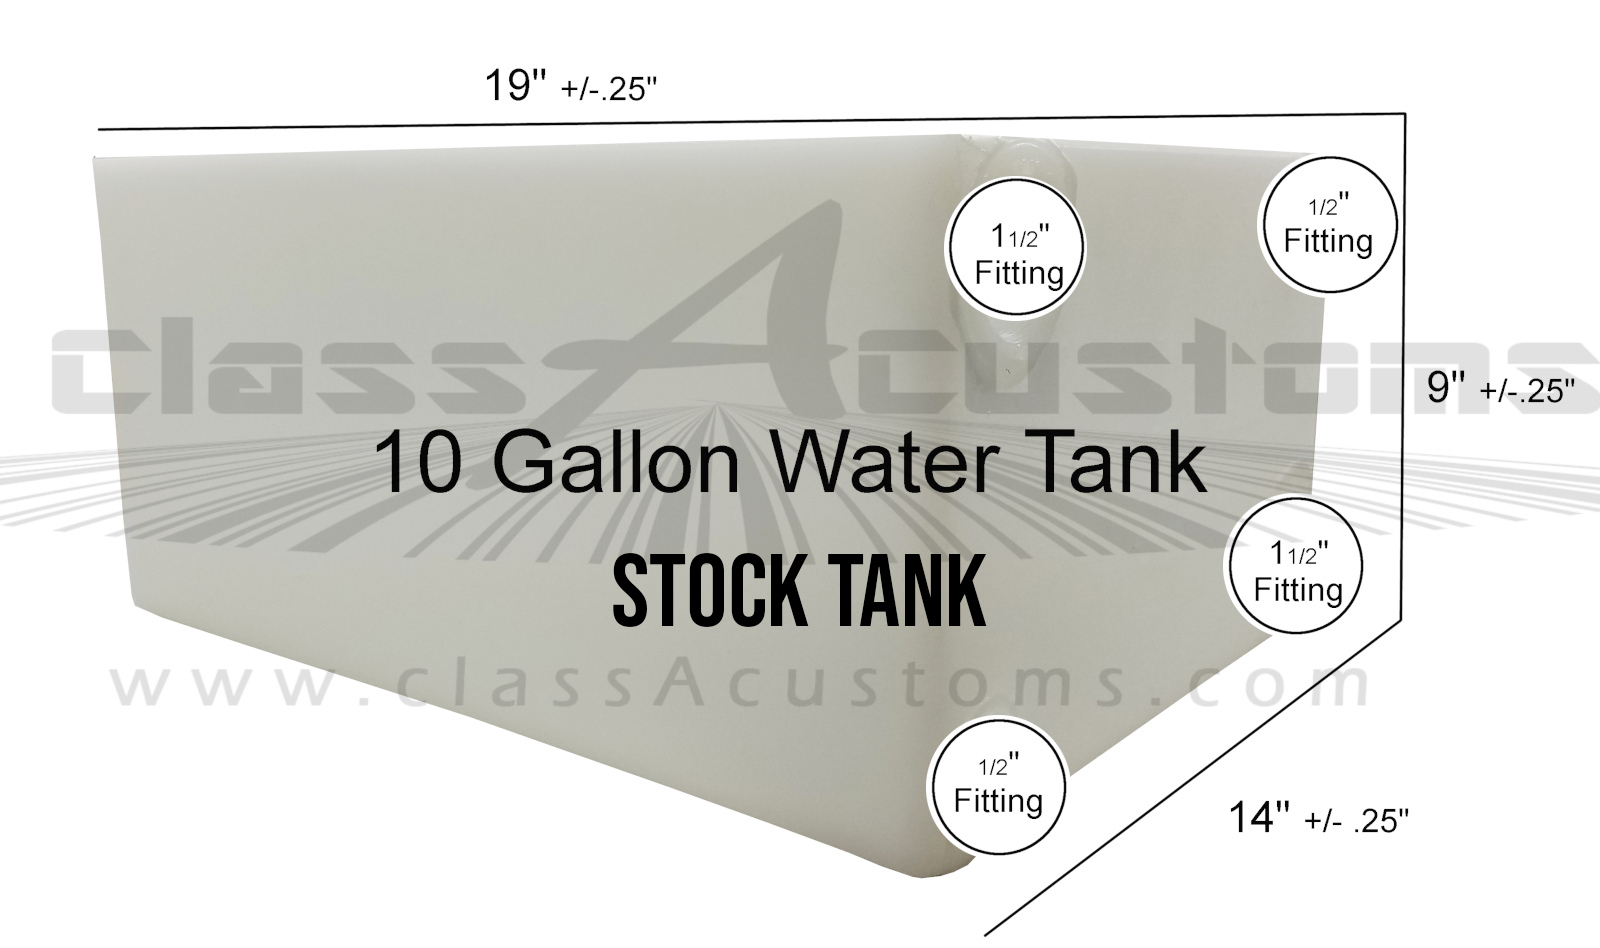 Freshwater Systems Freshwater Tanks & Inlets Automotive F.D.